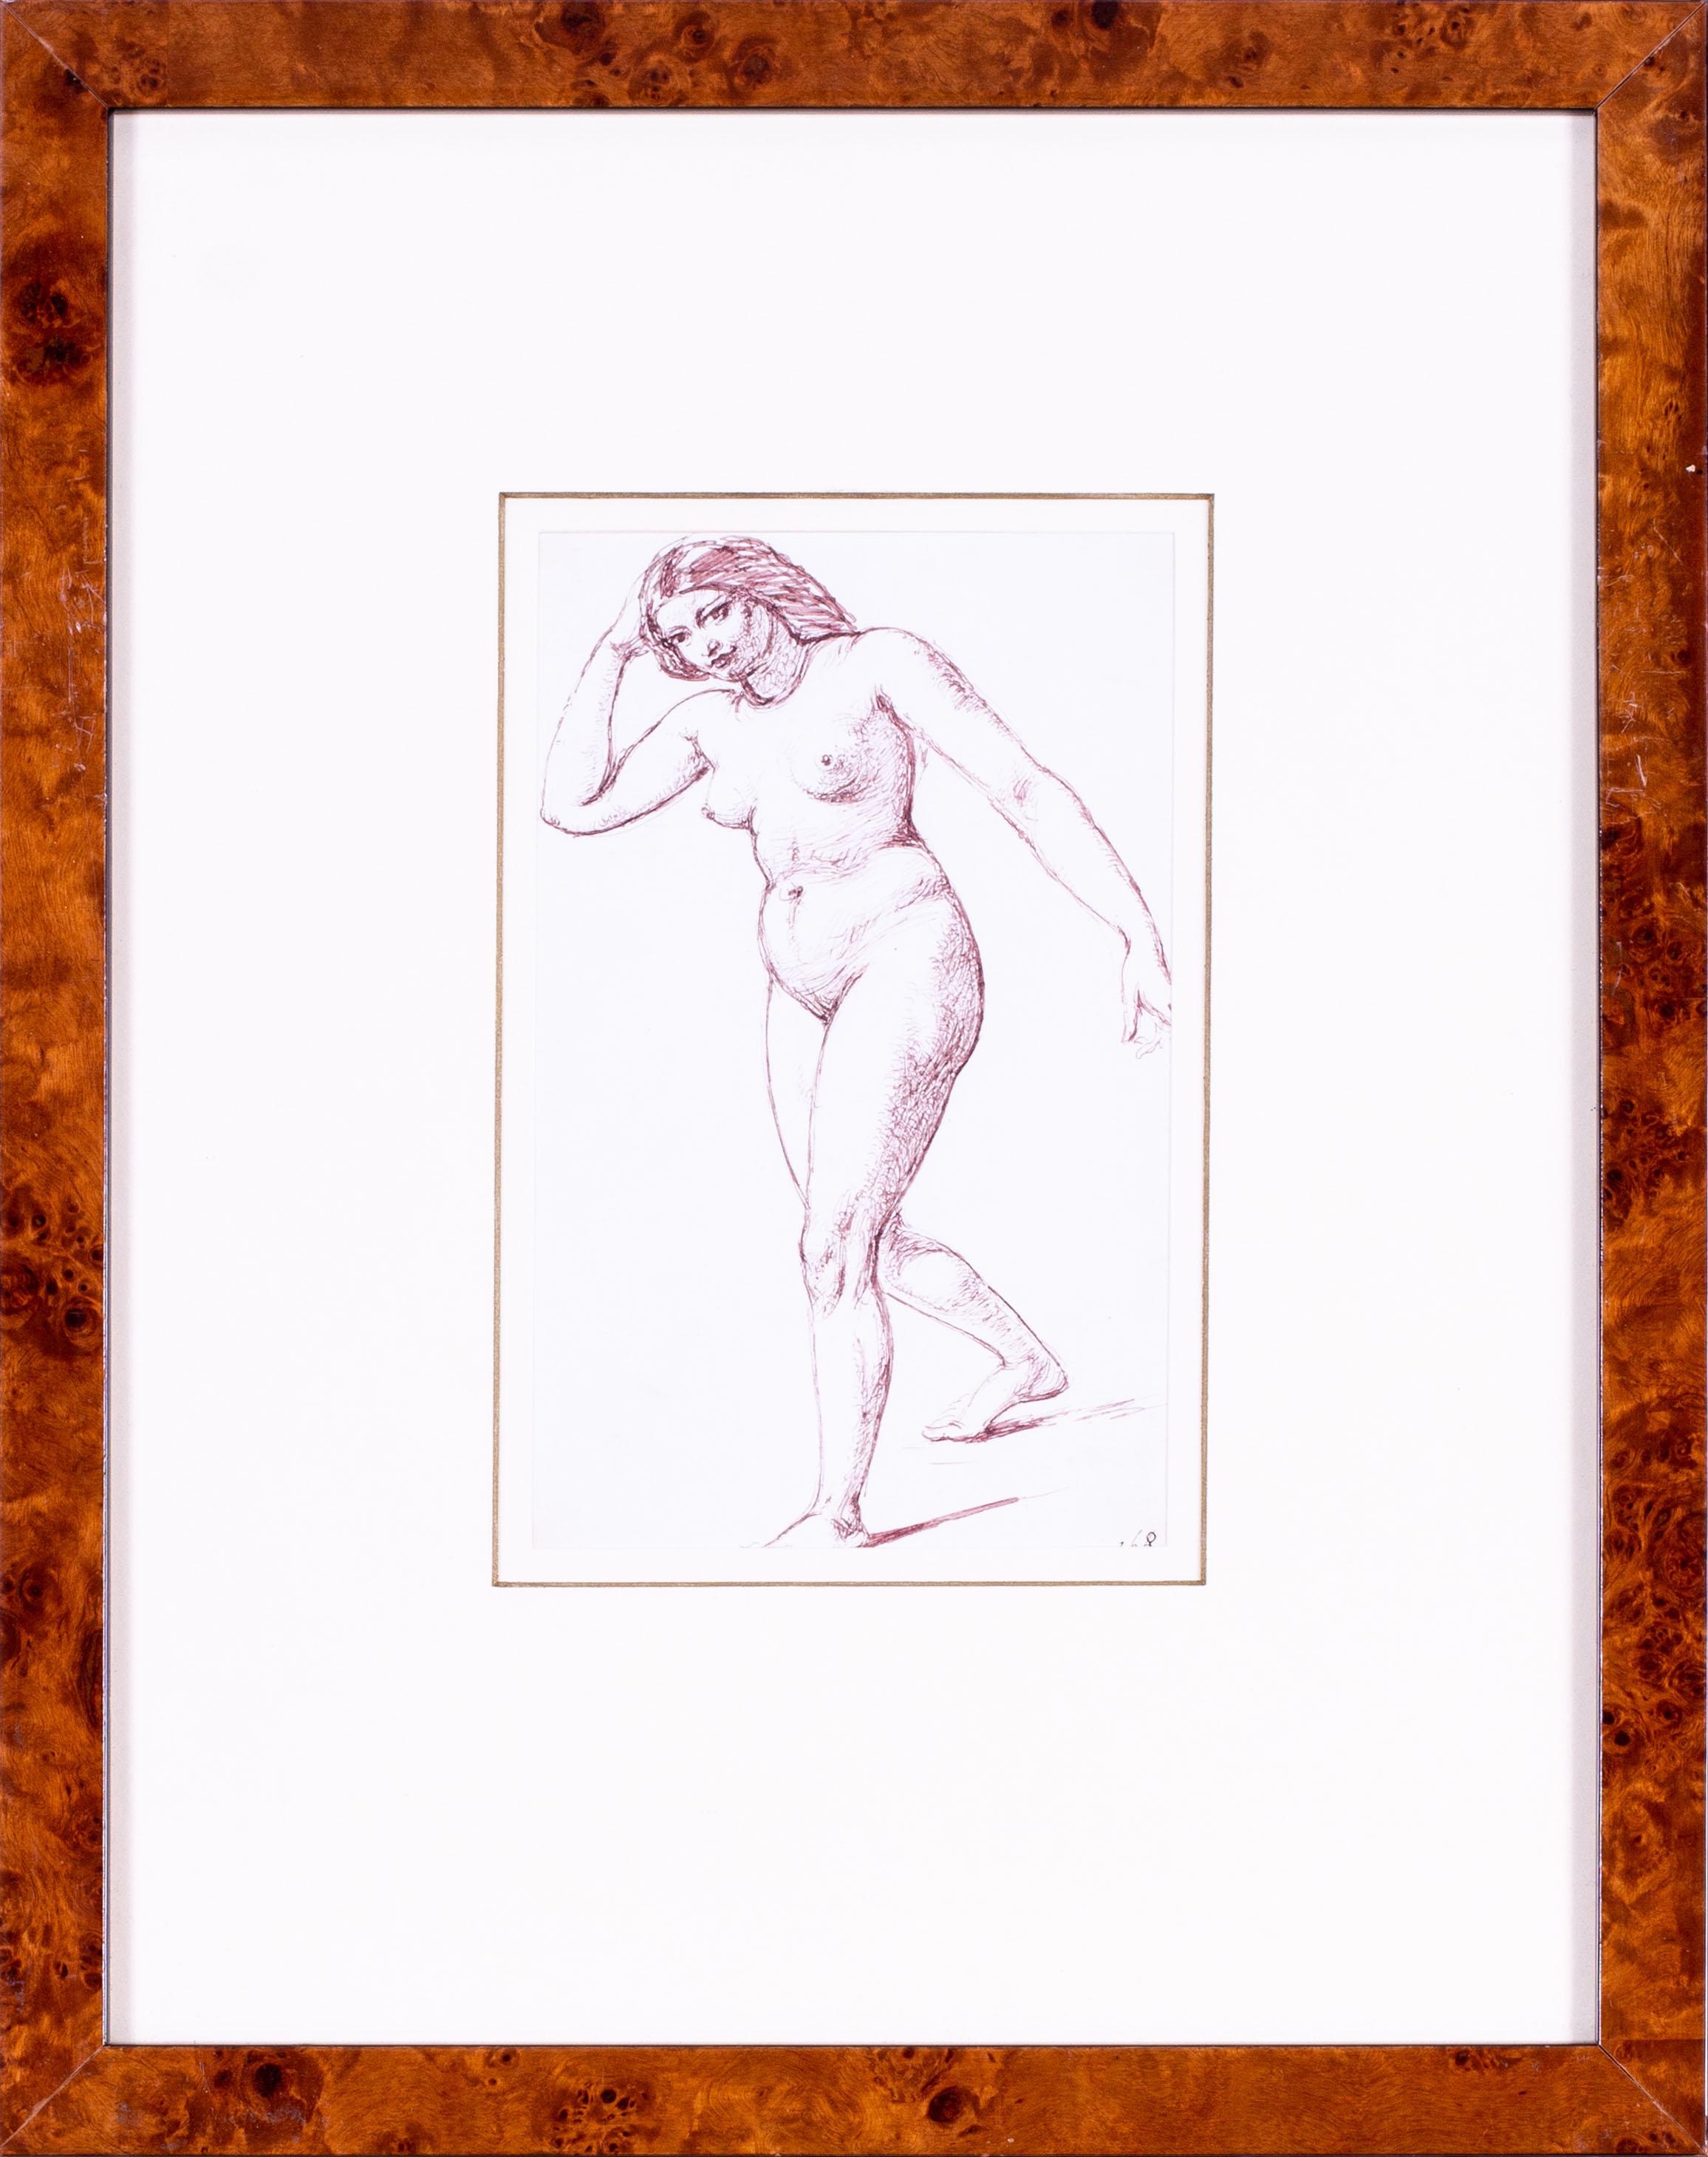 William Edward Frost RA (British, 1811 – 1877)
Female nude
Pen and ink
7 x 4.3/8in. (17.8 x 11 cm.)

Provenance: The Maas Gallery, London.  No. 13889
